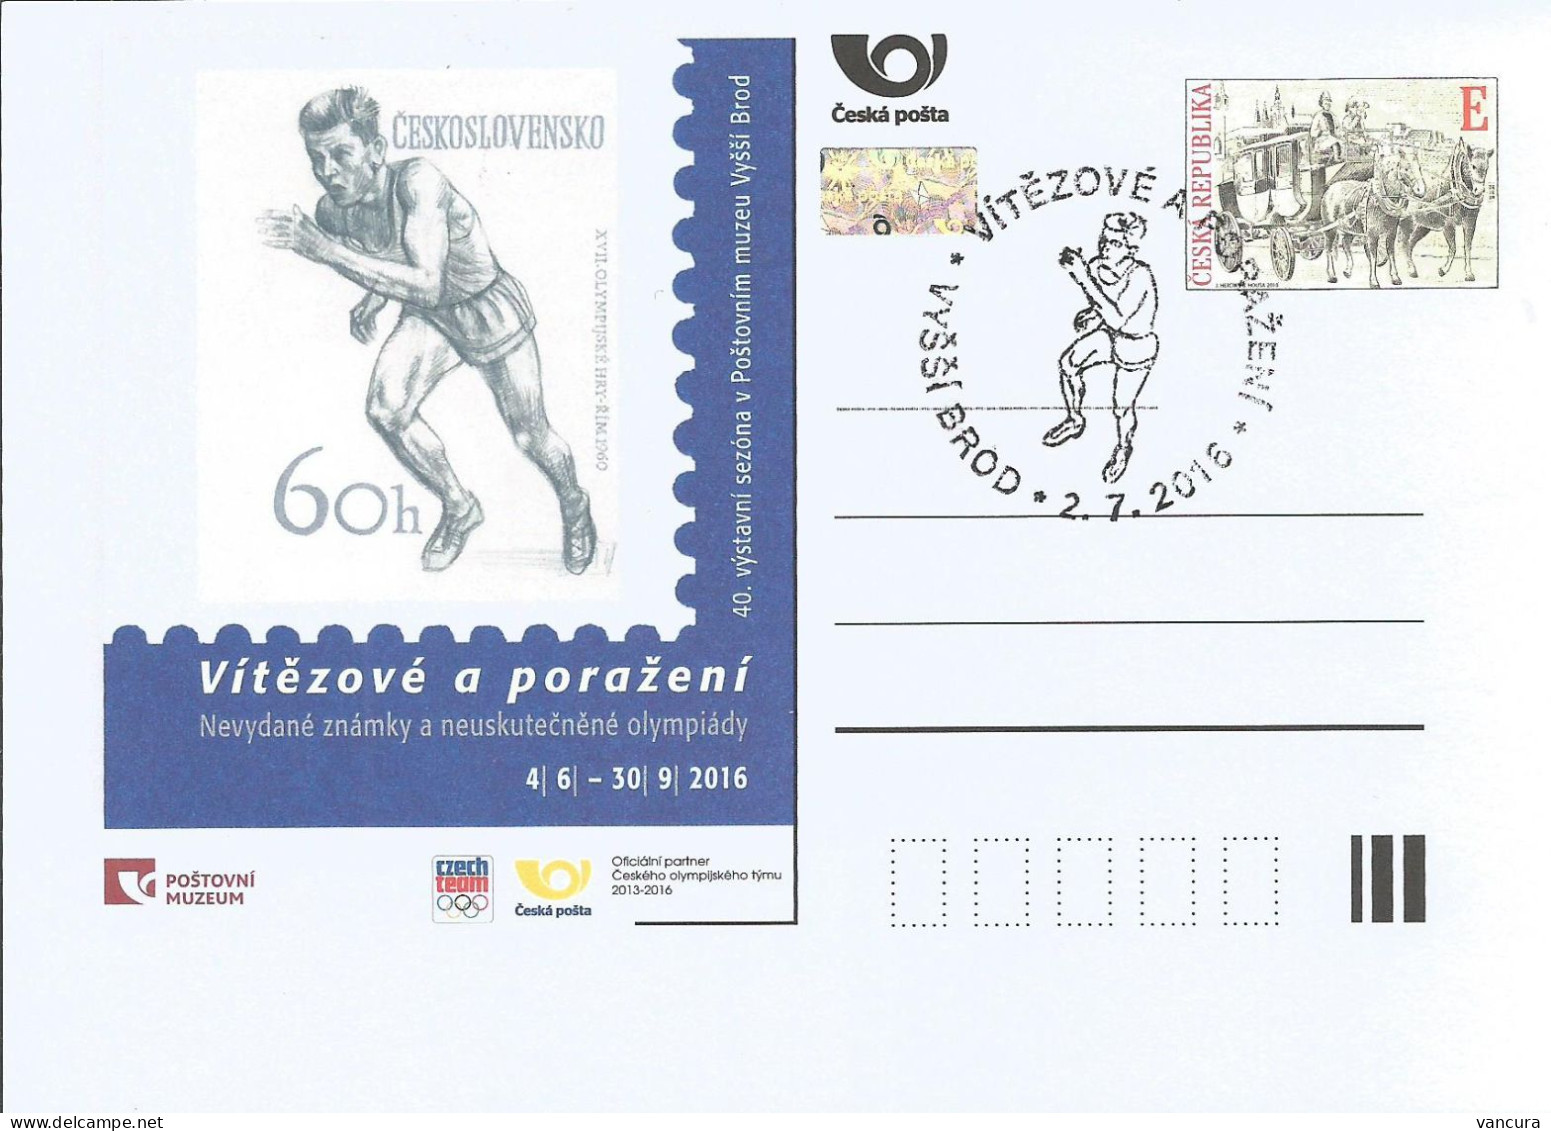 CDV PM 112 Czech Republic Exhibition In Post Museum In Vyssi Brod/Hohenfurth - Unissued Designs Of Olympic Stamps 2016 - Ete 1960: Rome